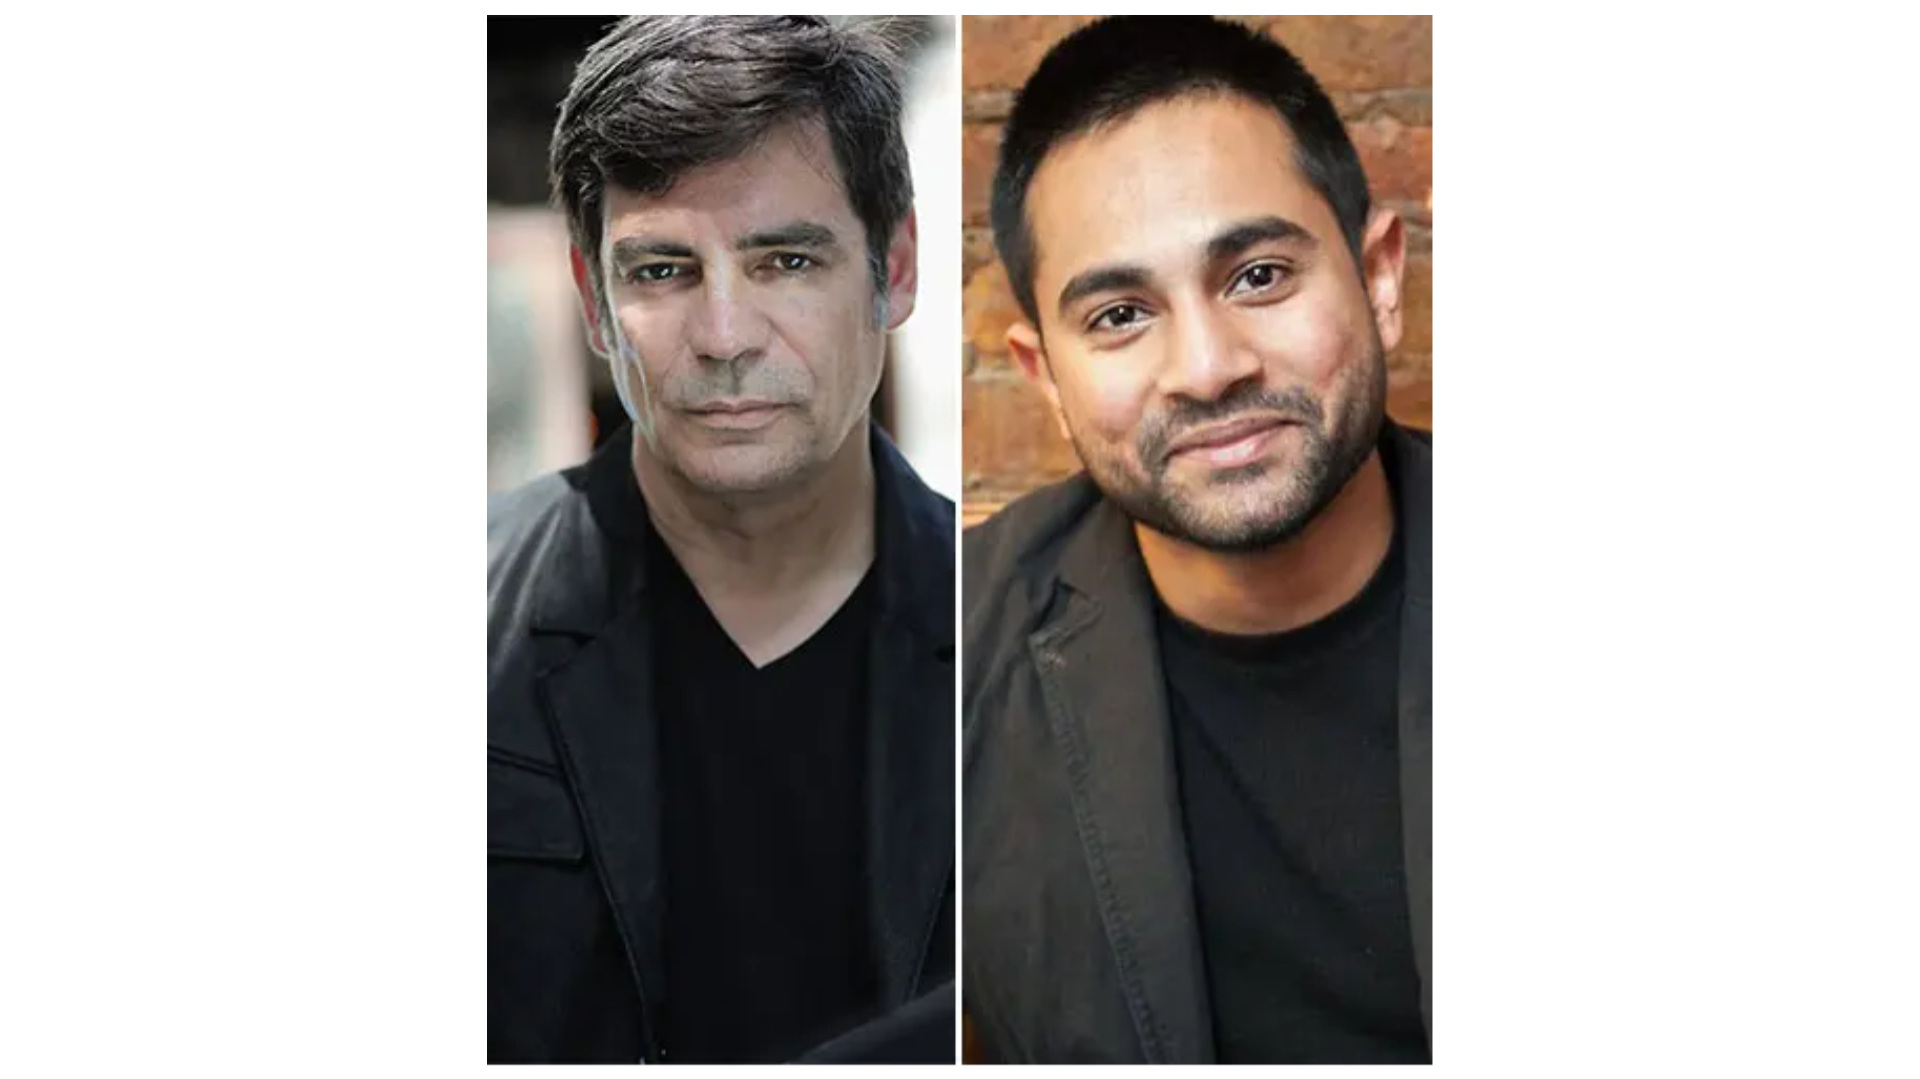 Open VISIONS Forum & the College of Arts & Sciences Common Ground Series: Nick Gillespie & Bhaskar Sunkara – “A Socialist and a Libertarian Walk Onto a Stage”